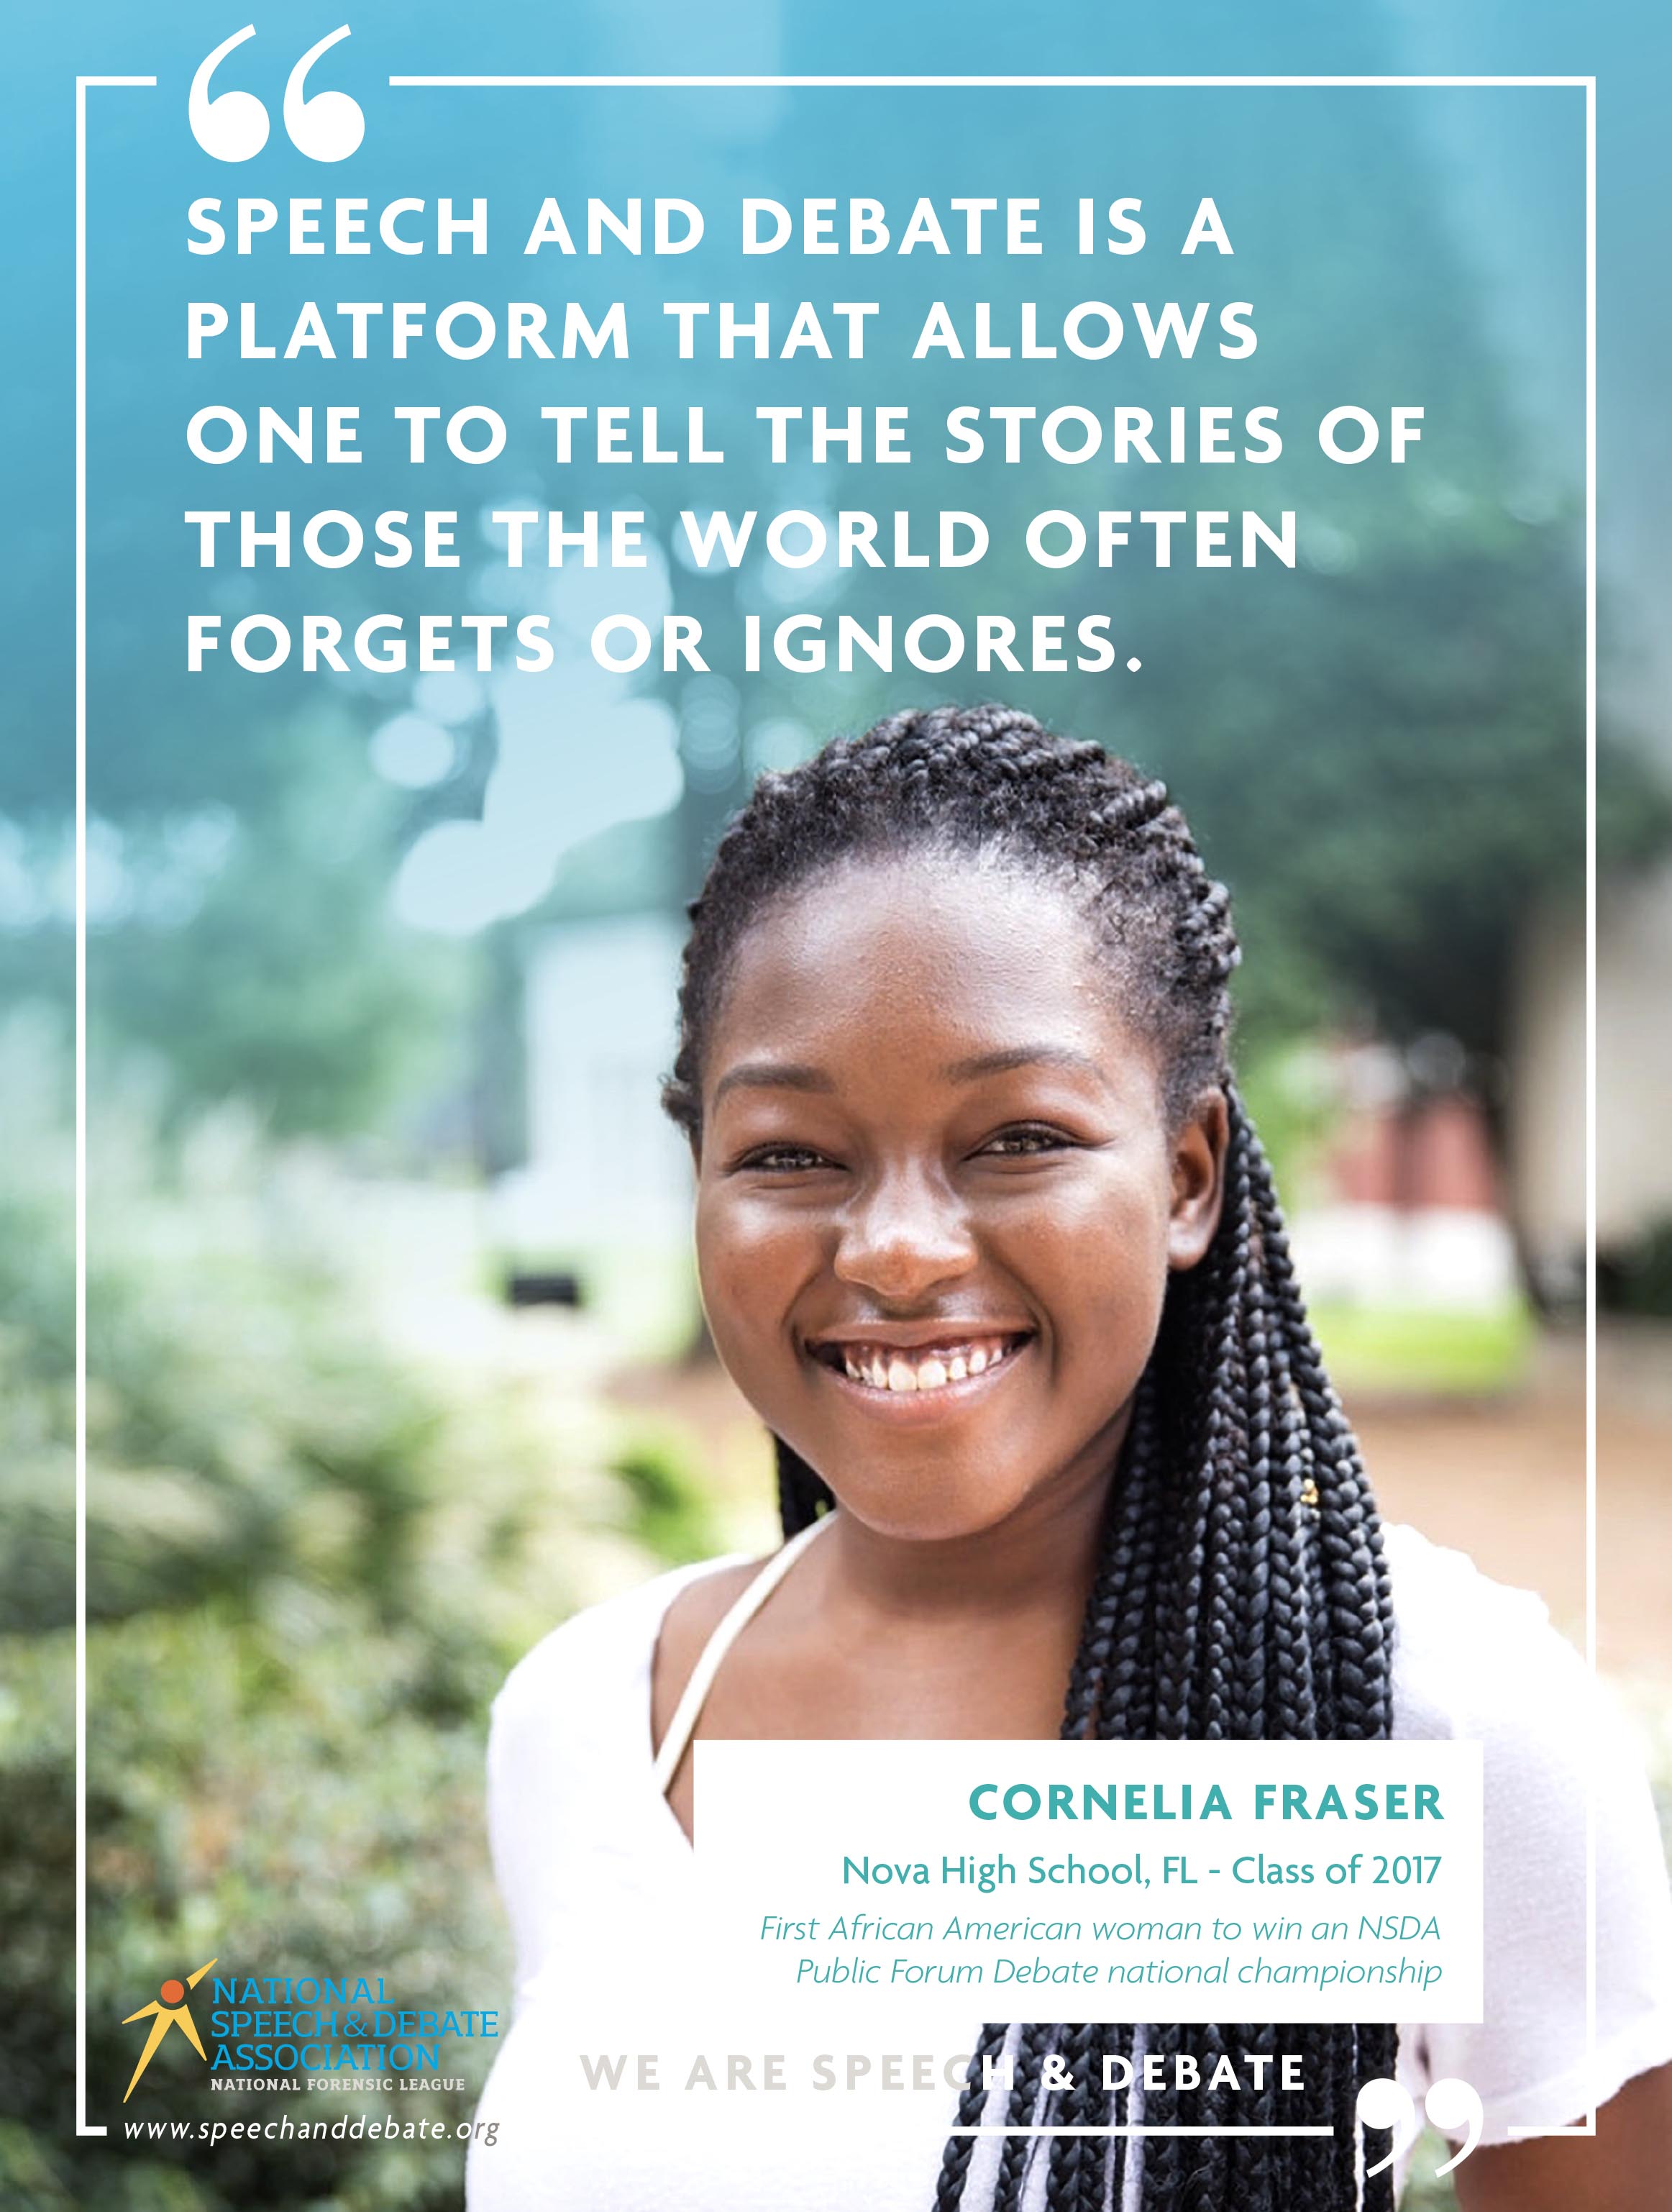 SPEECH AND DEBATE IS A PLATFORM THAT ALLOWS ONE TO TELL THE STORIES OF THOSE THE WORLD OFTEN FORGETS OR IGNORES. - Cornelia Fraser